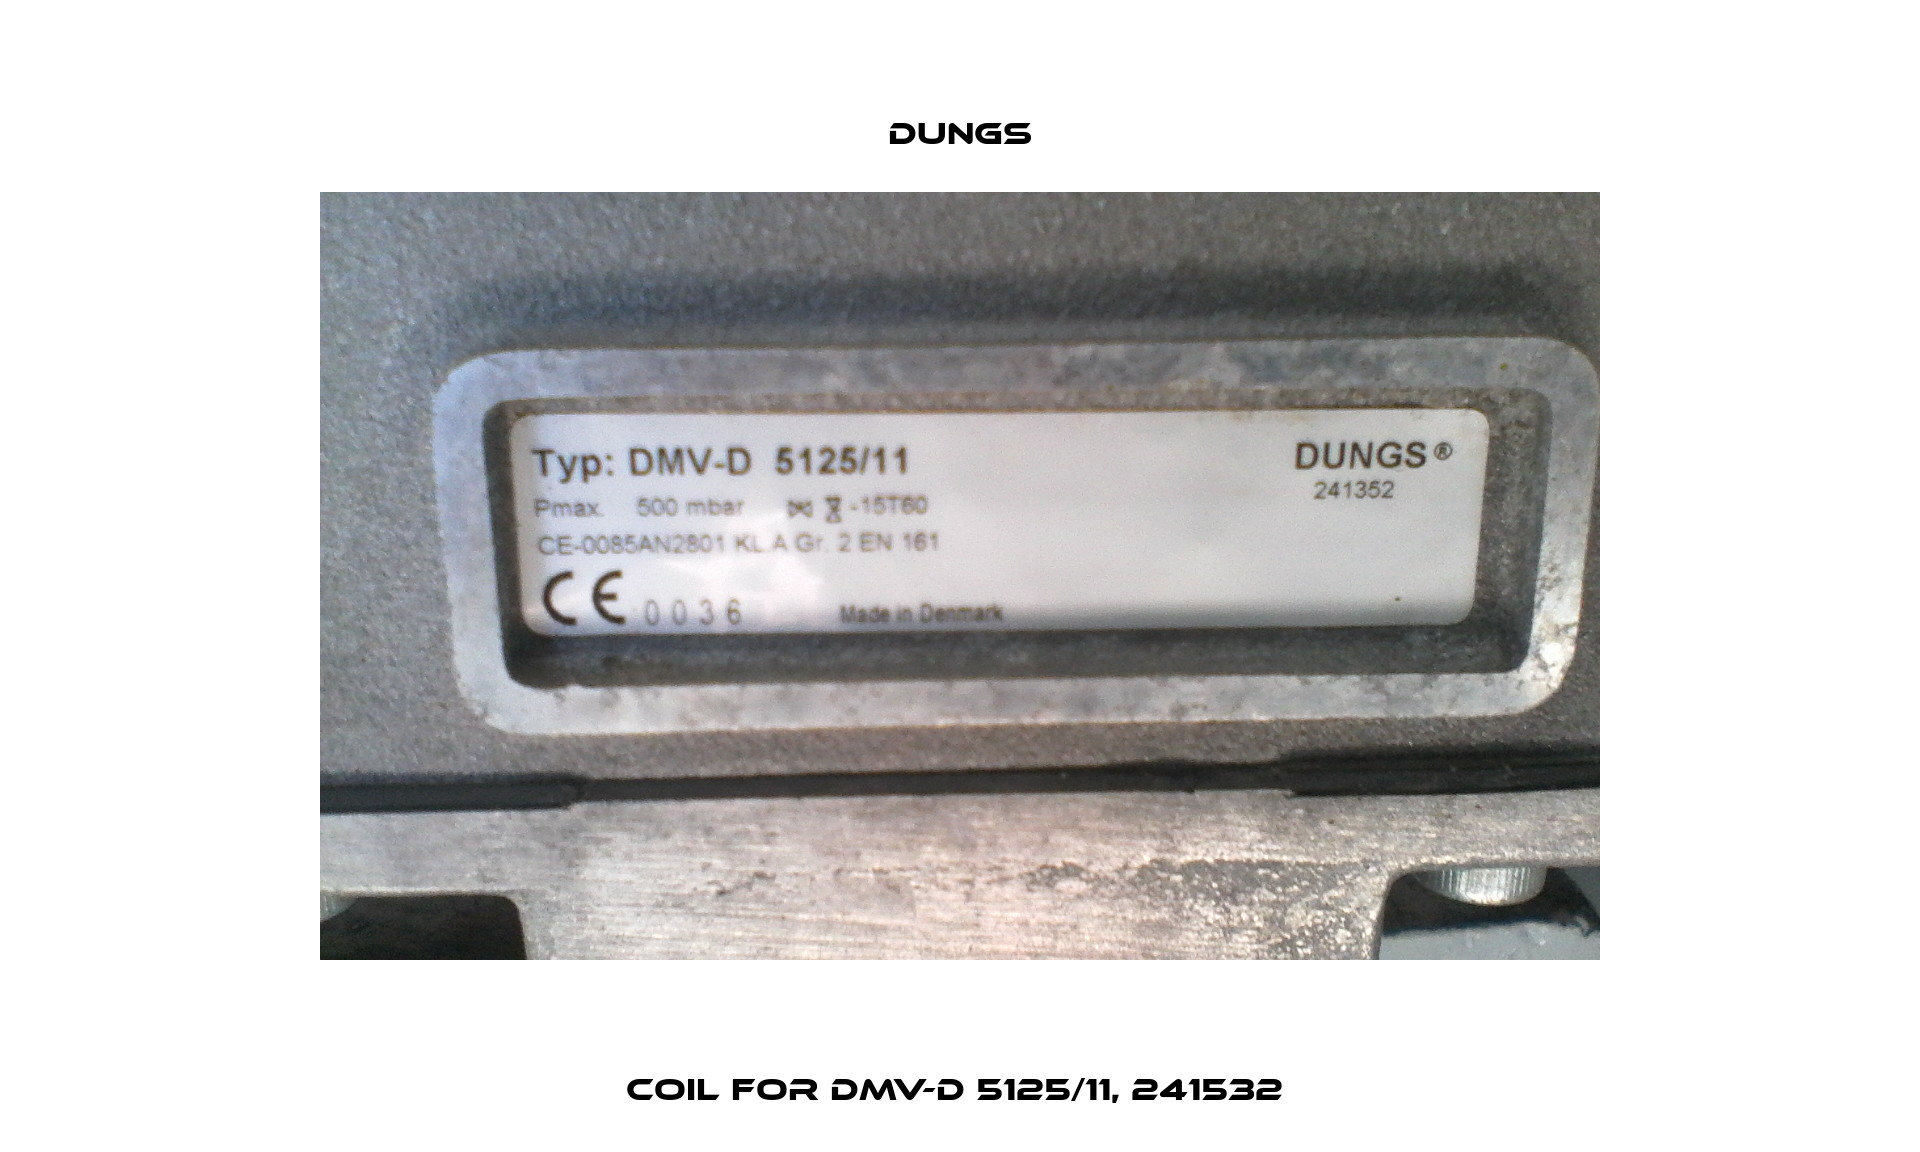 Coil for DMV-D 5125/11, 241532  Dungs